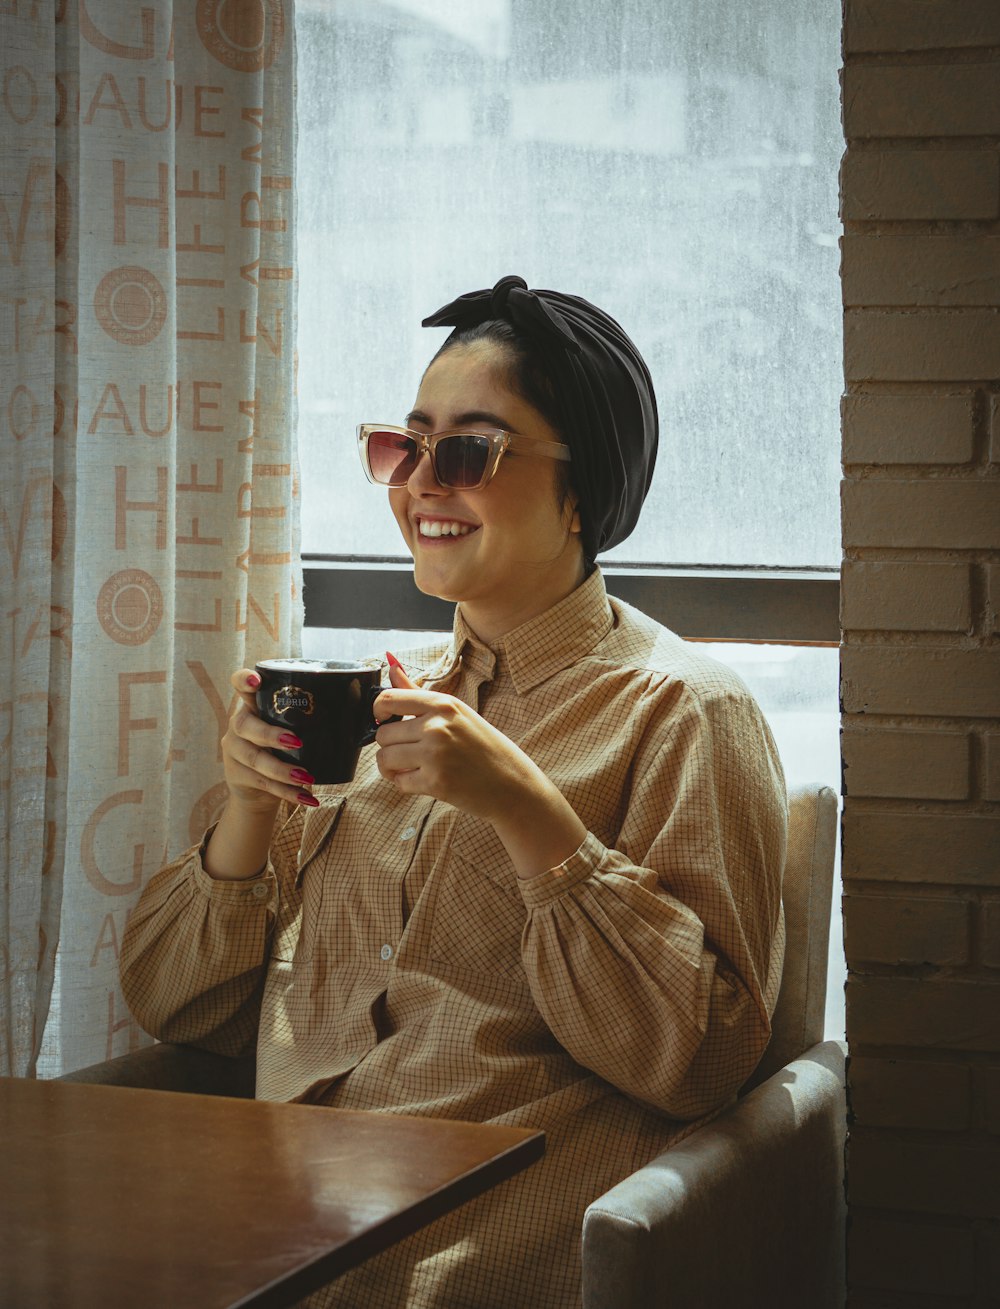 a person wearing headphones and holding a cup of coffee